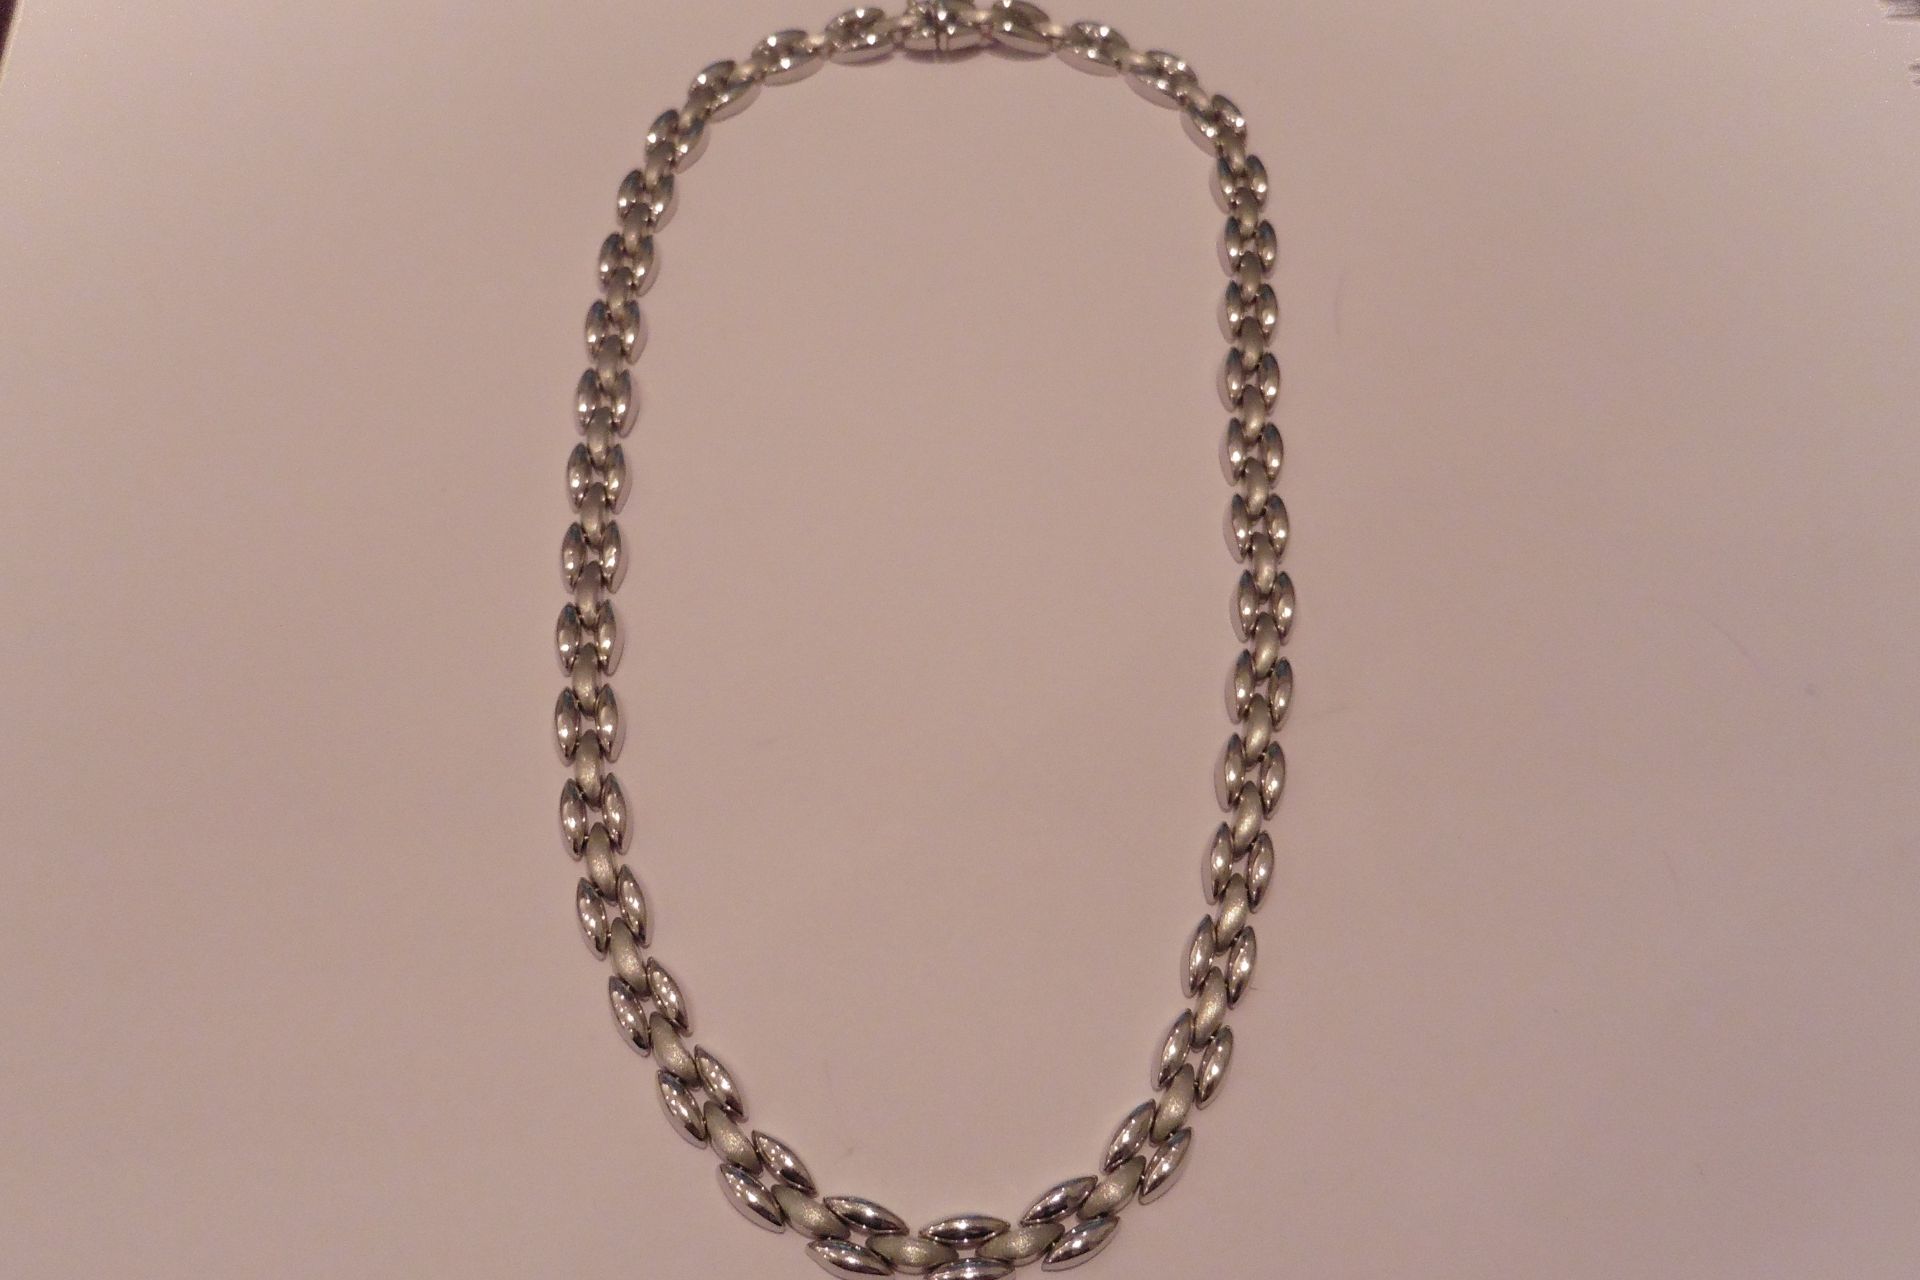 Pre-owned 9ct white gold chunky necklace.  16” in length, it is has a wheat pattern with the middle